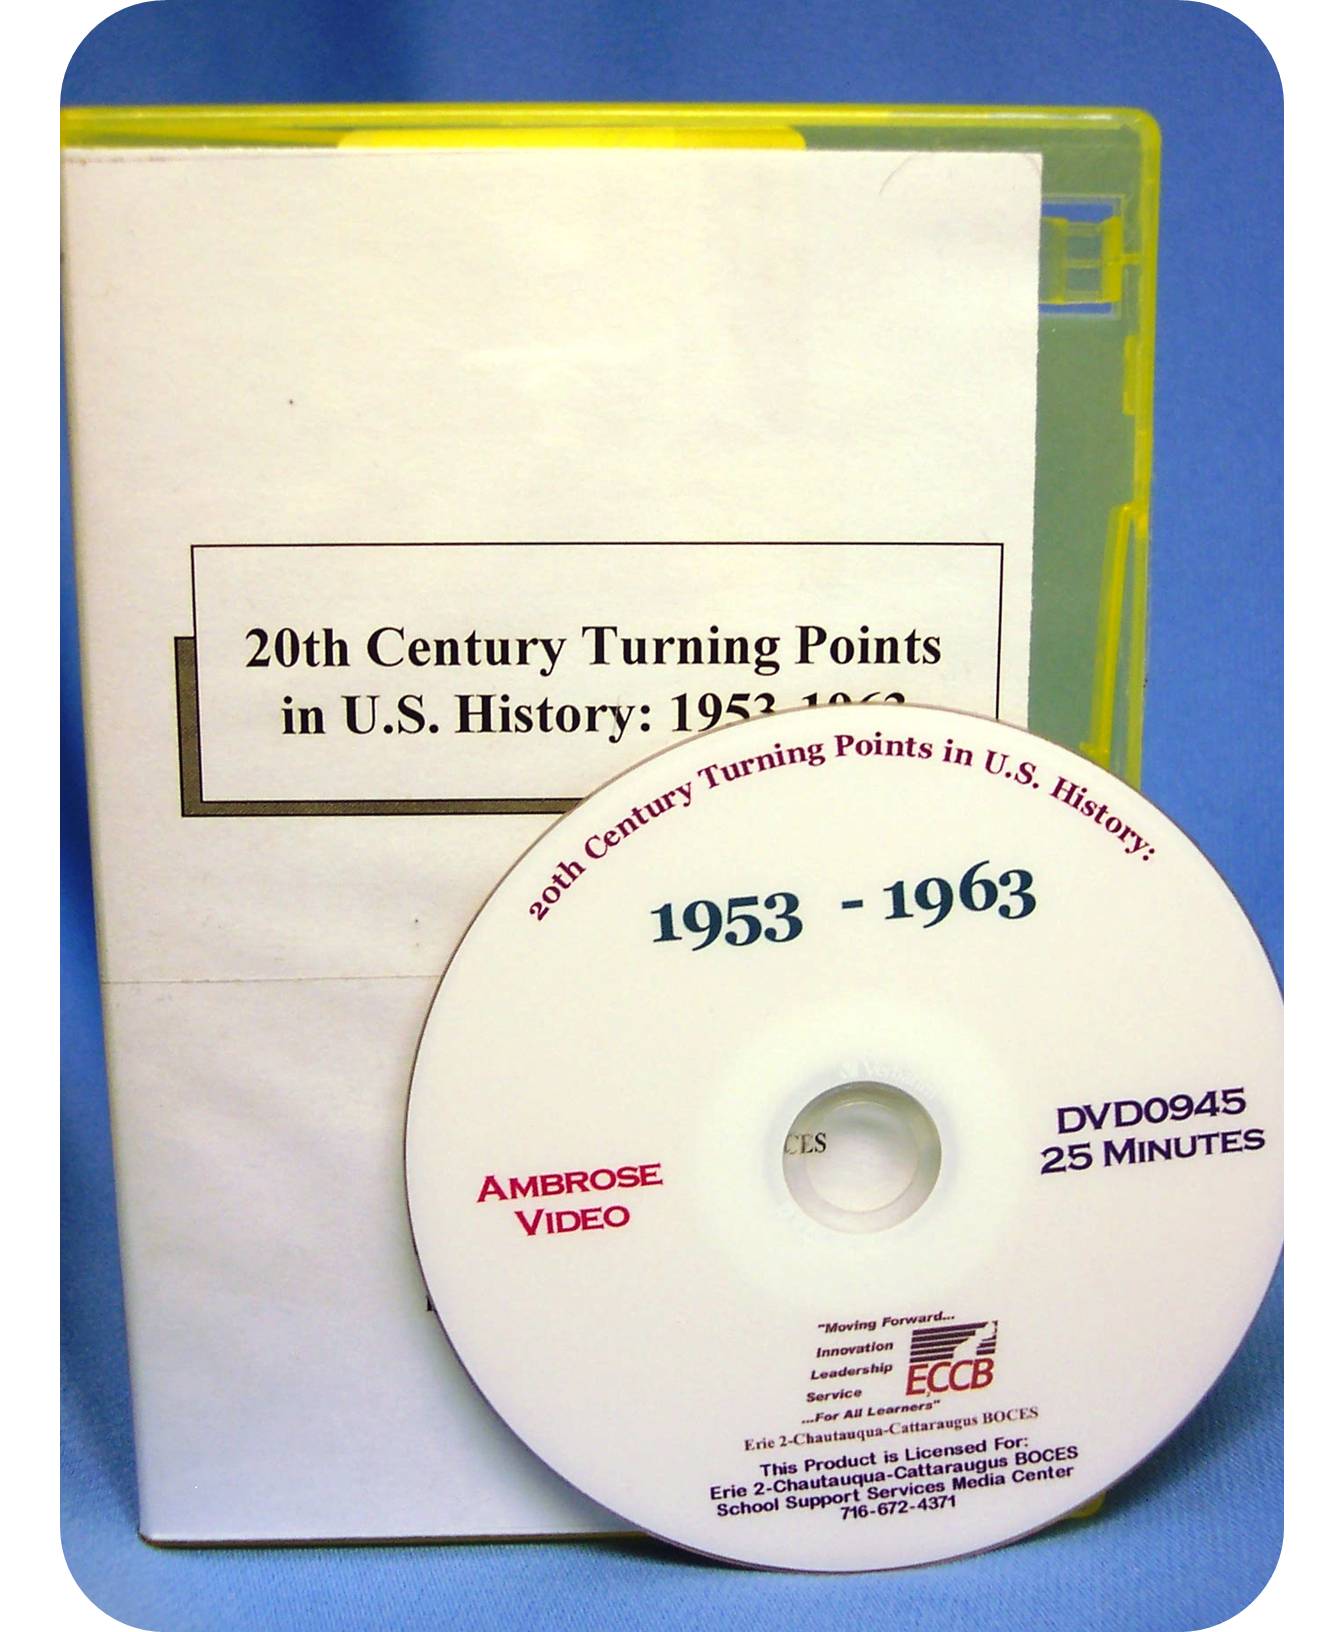 20th Century Turning Points in U.S. History: 1953-1963